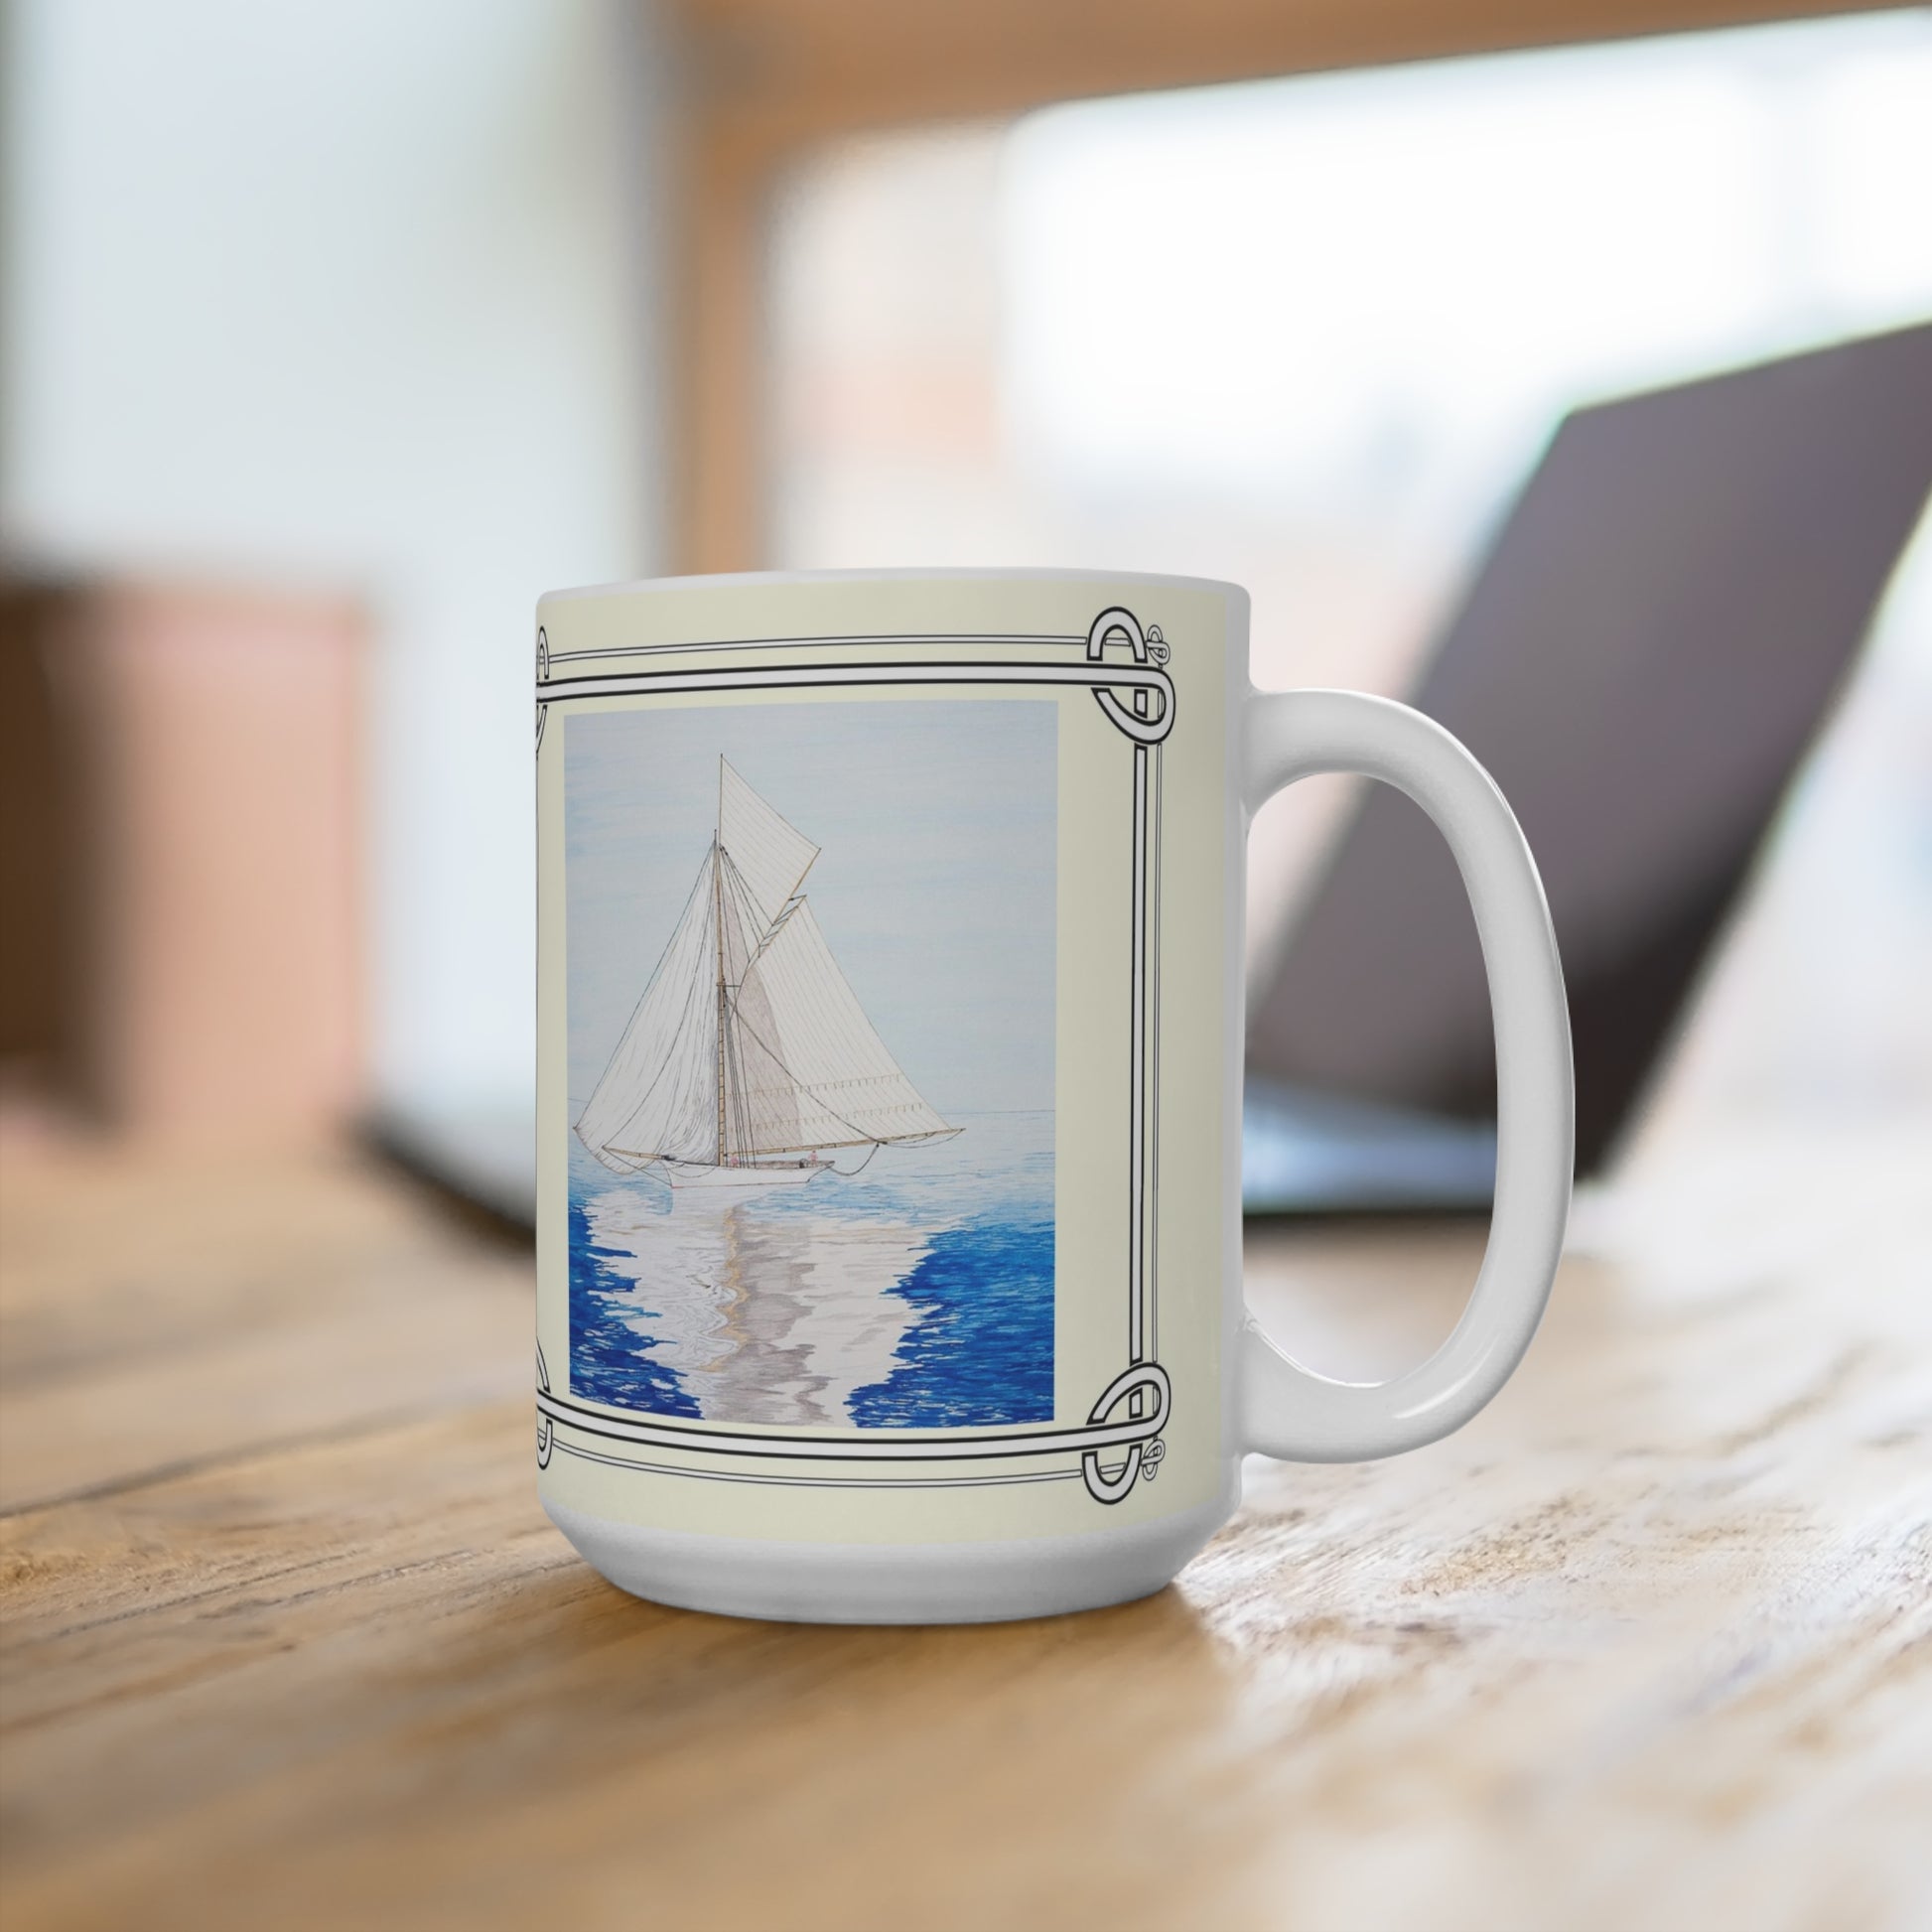 Your Becalmed 15 oz. mug with your favorite beverage will provide needed refreshment as you work on your laptop.